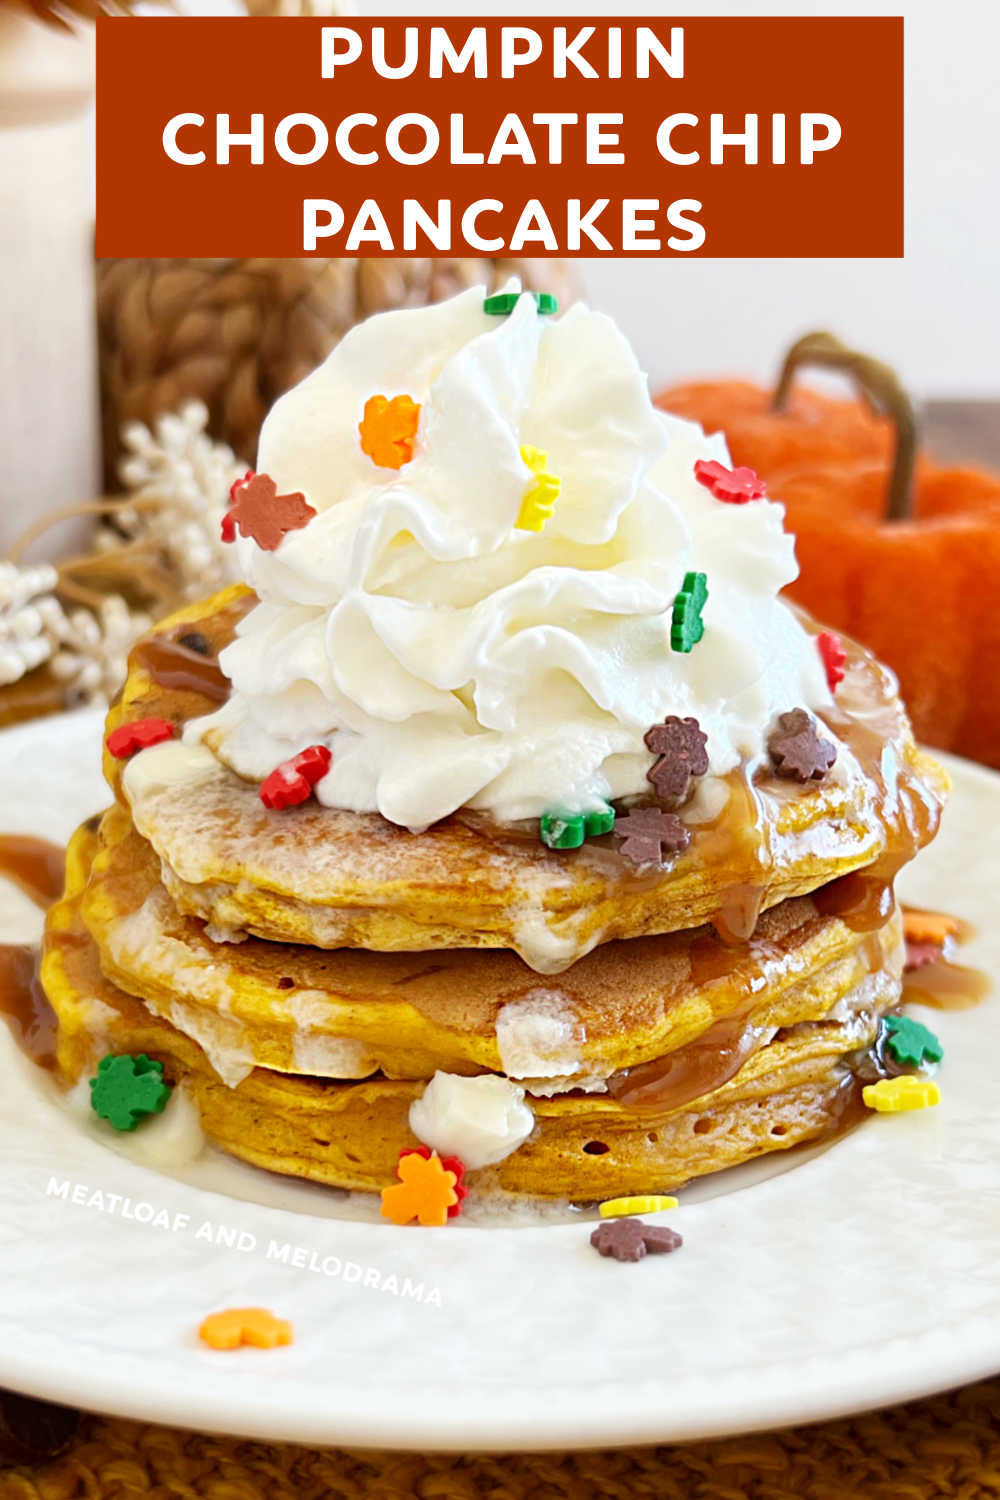 Pumpkin Chocolate Chip Pancakes are easy homemade pumpkin pancakes filled with chocolate chips. This easy pumpkin pancake recipe makes a delicious breakfast perfect for crisp fall mornings! via @meamel